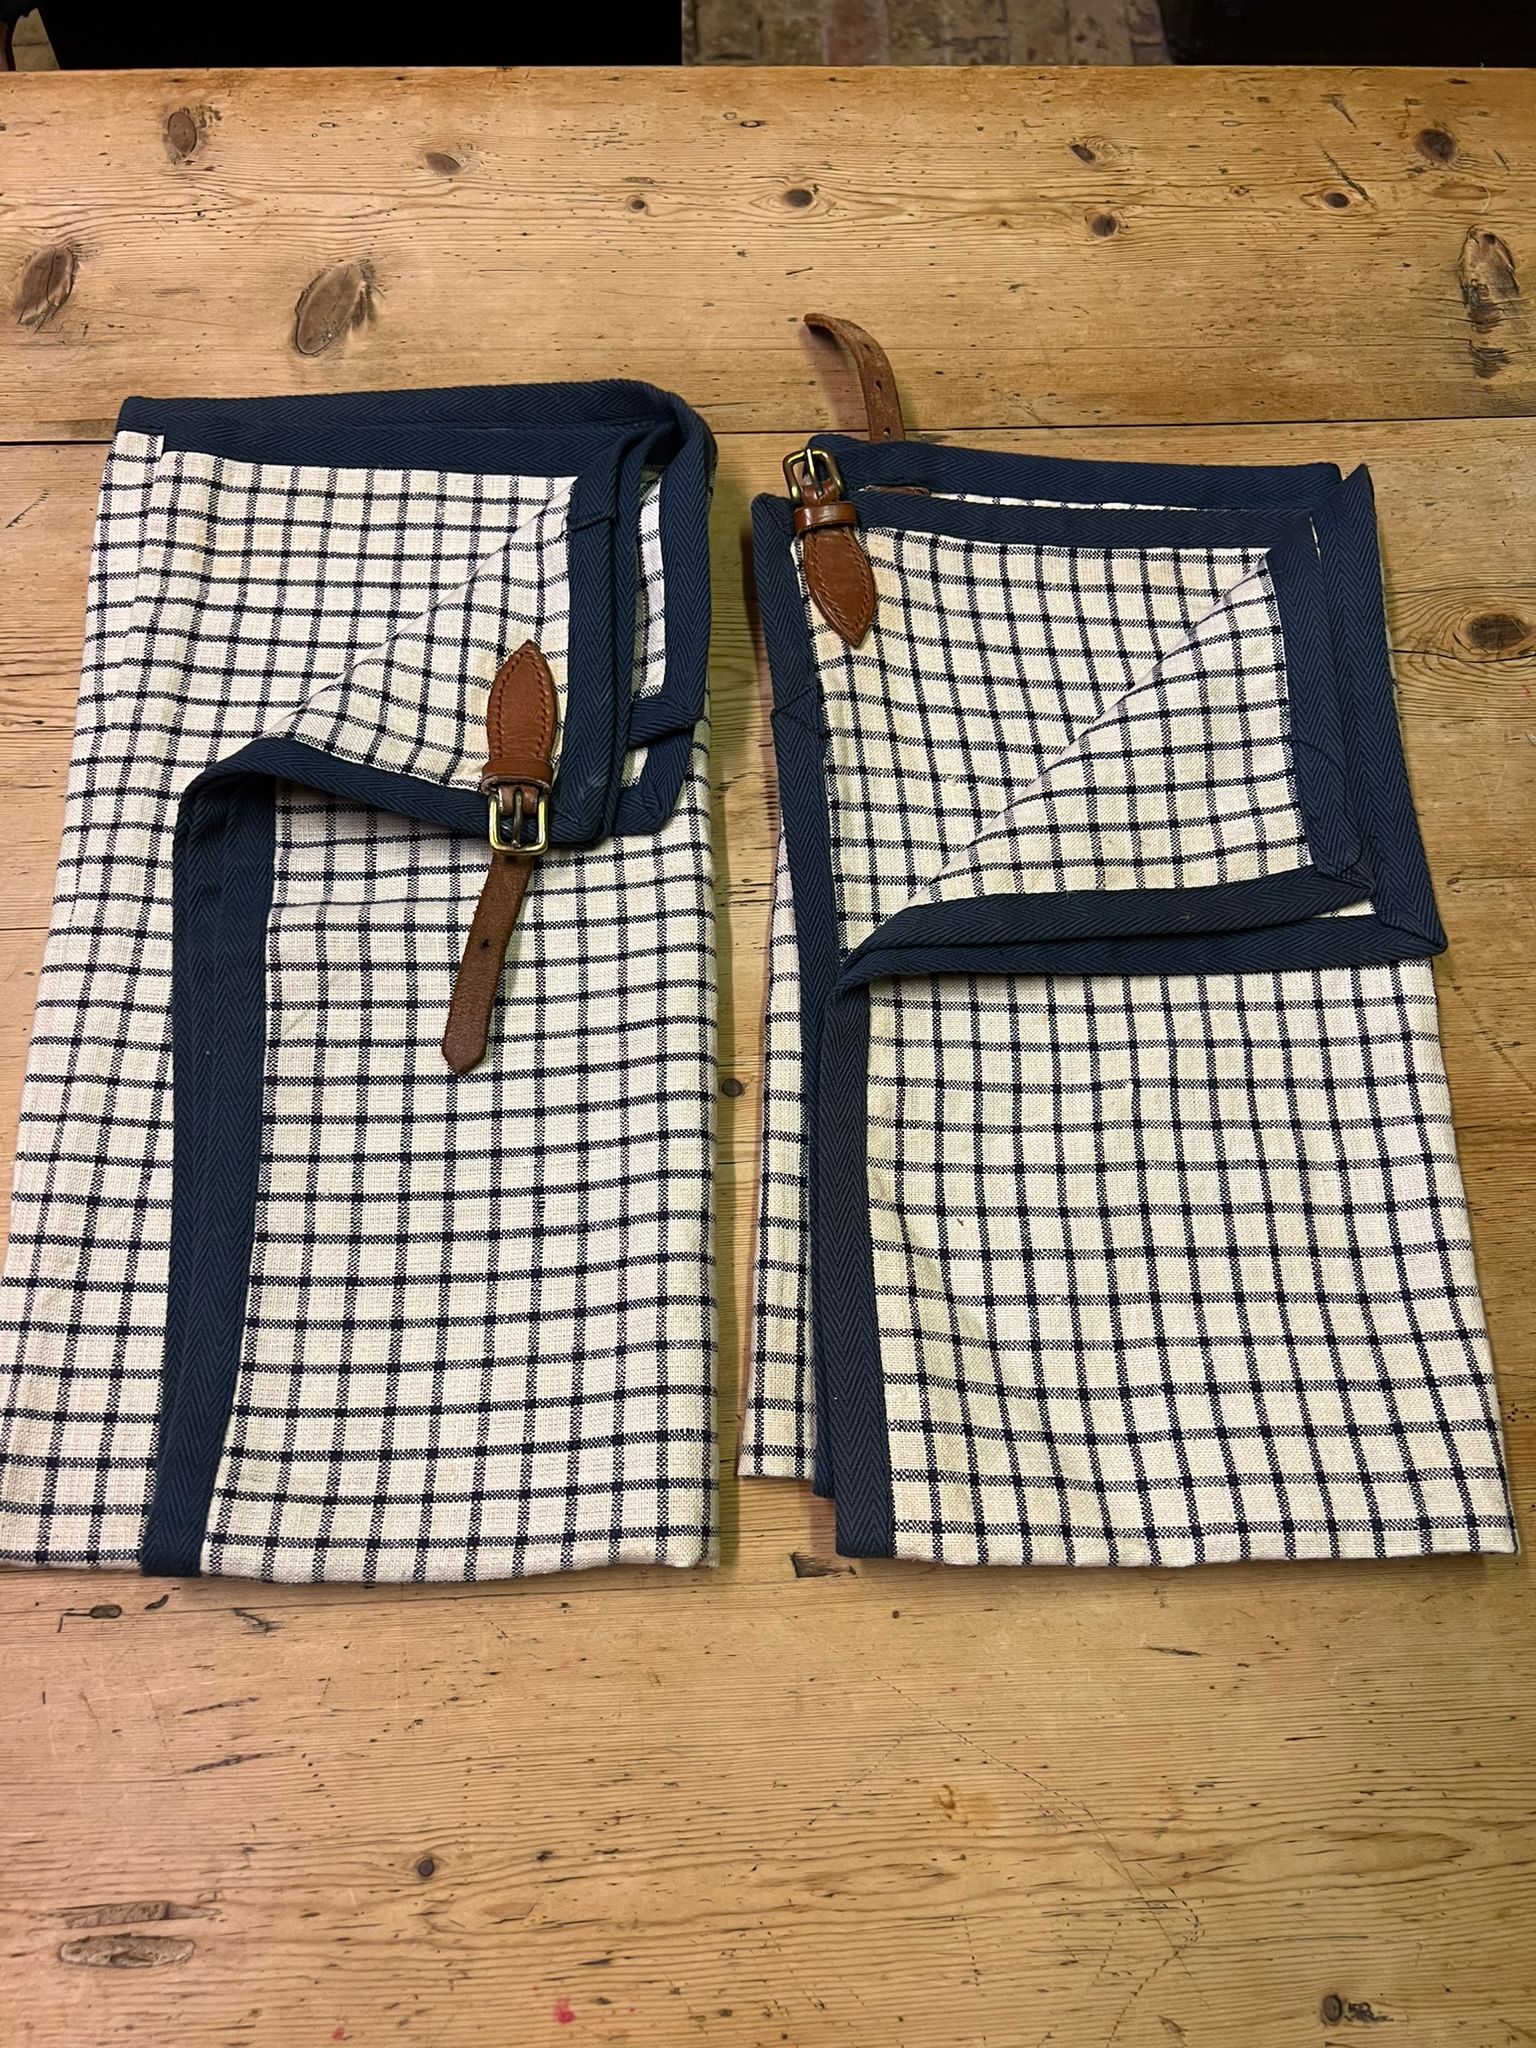 Pair of Tattersall check aprons with leather buckles